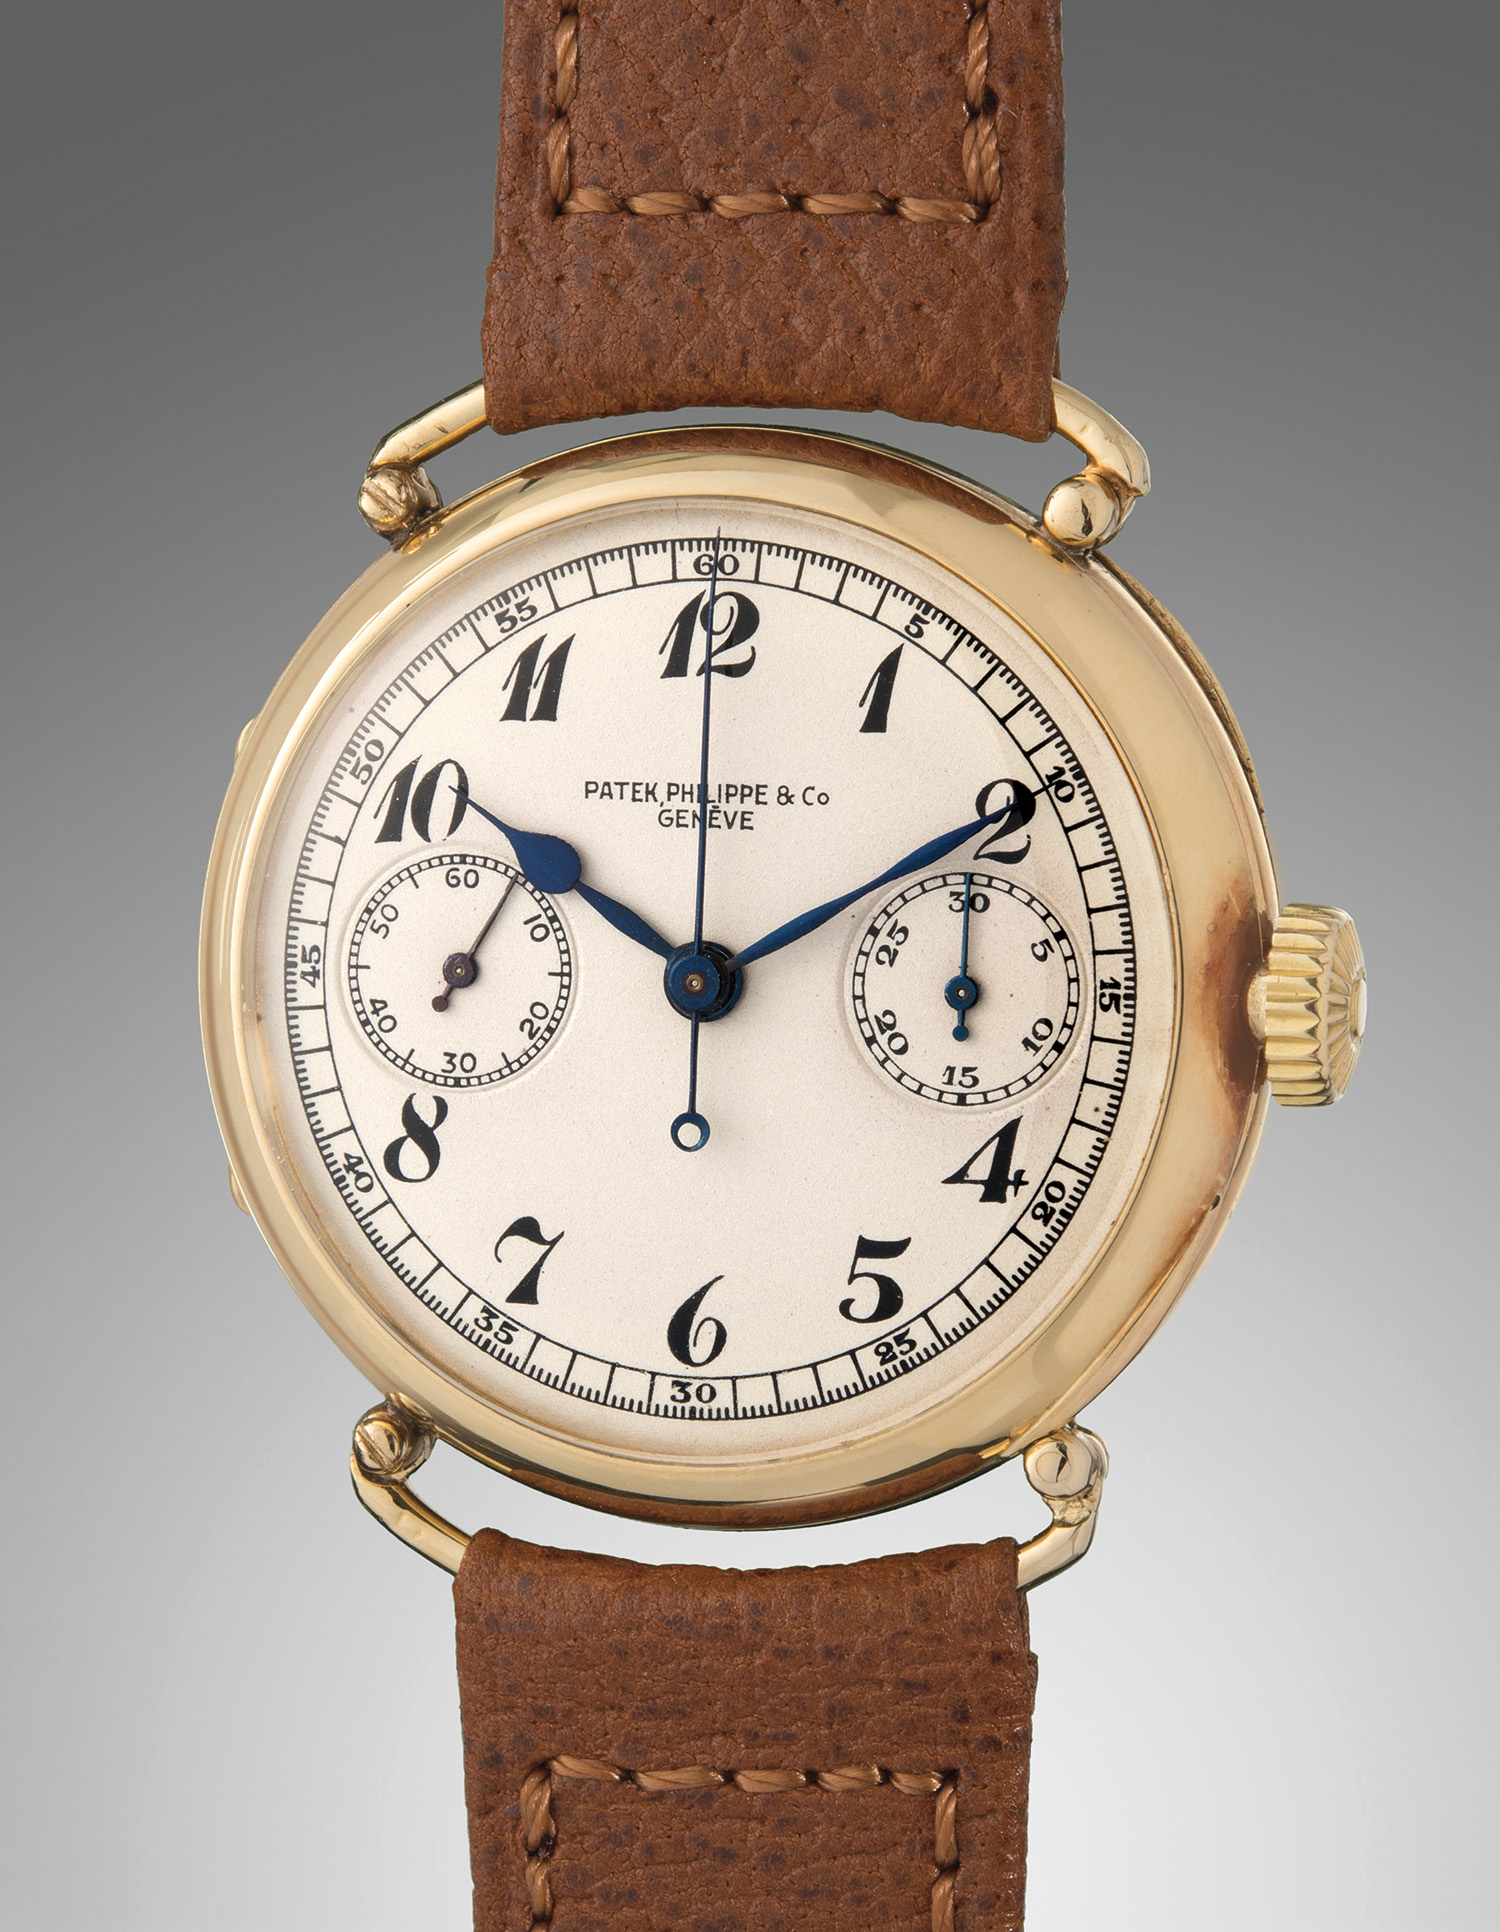 An extremely rare yellow gold single button chronograph wristwatch with Breguet numerals. Sold for $337,500.